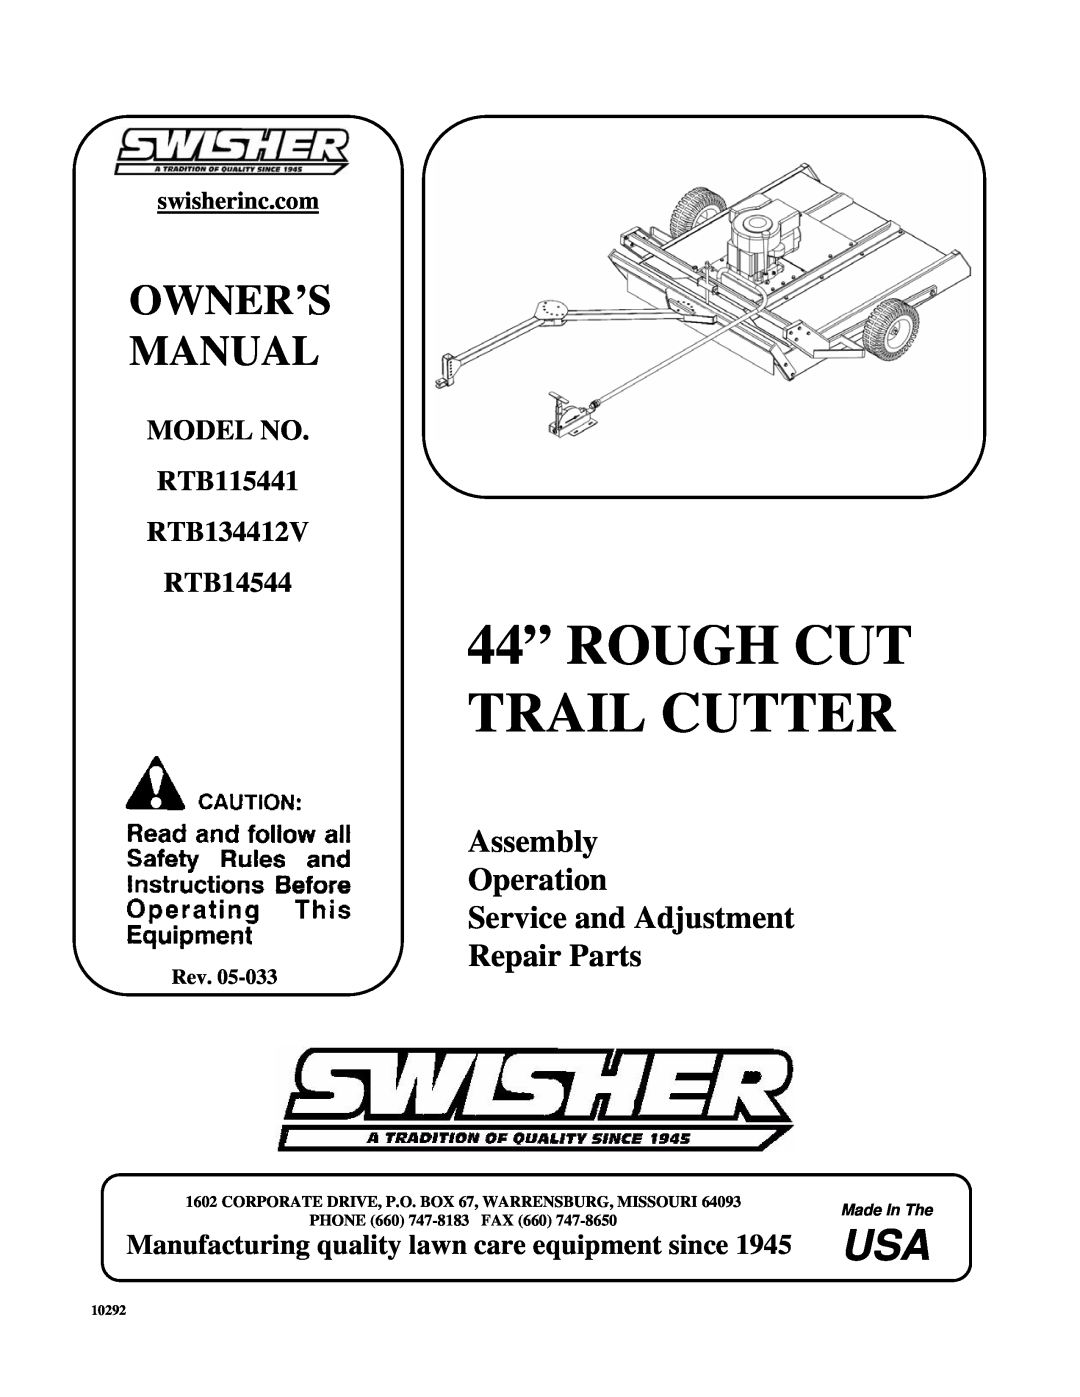 Swisher owner manual MODEL NO RTB115441 RTB134412V RTB14544, Manufacturing quality lawn care equipment since, Rev 